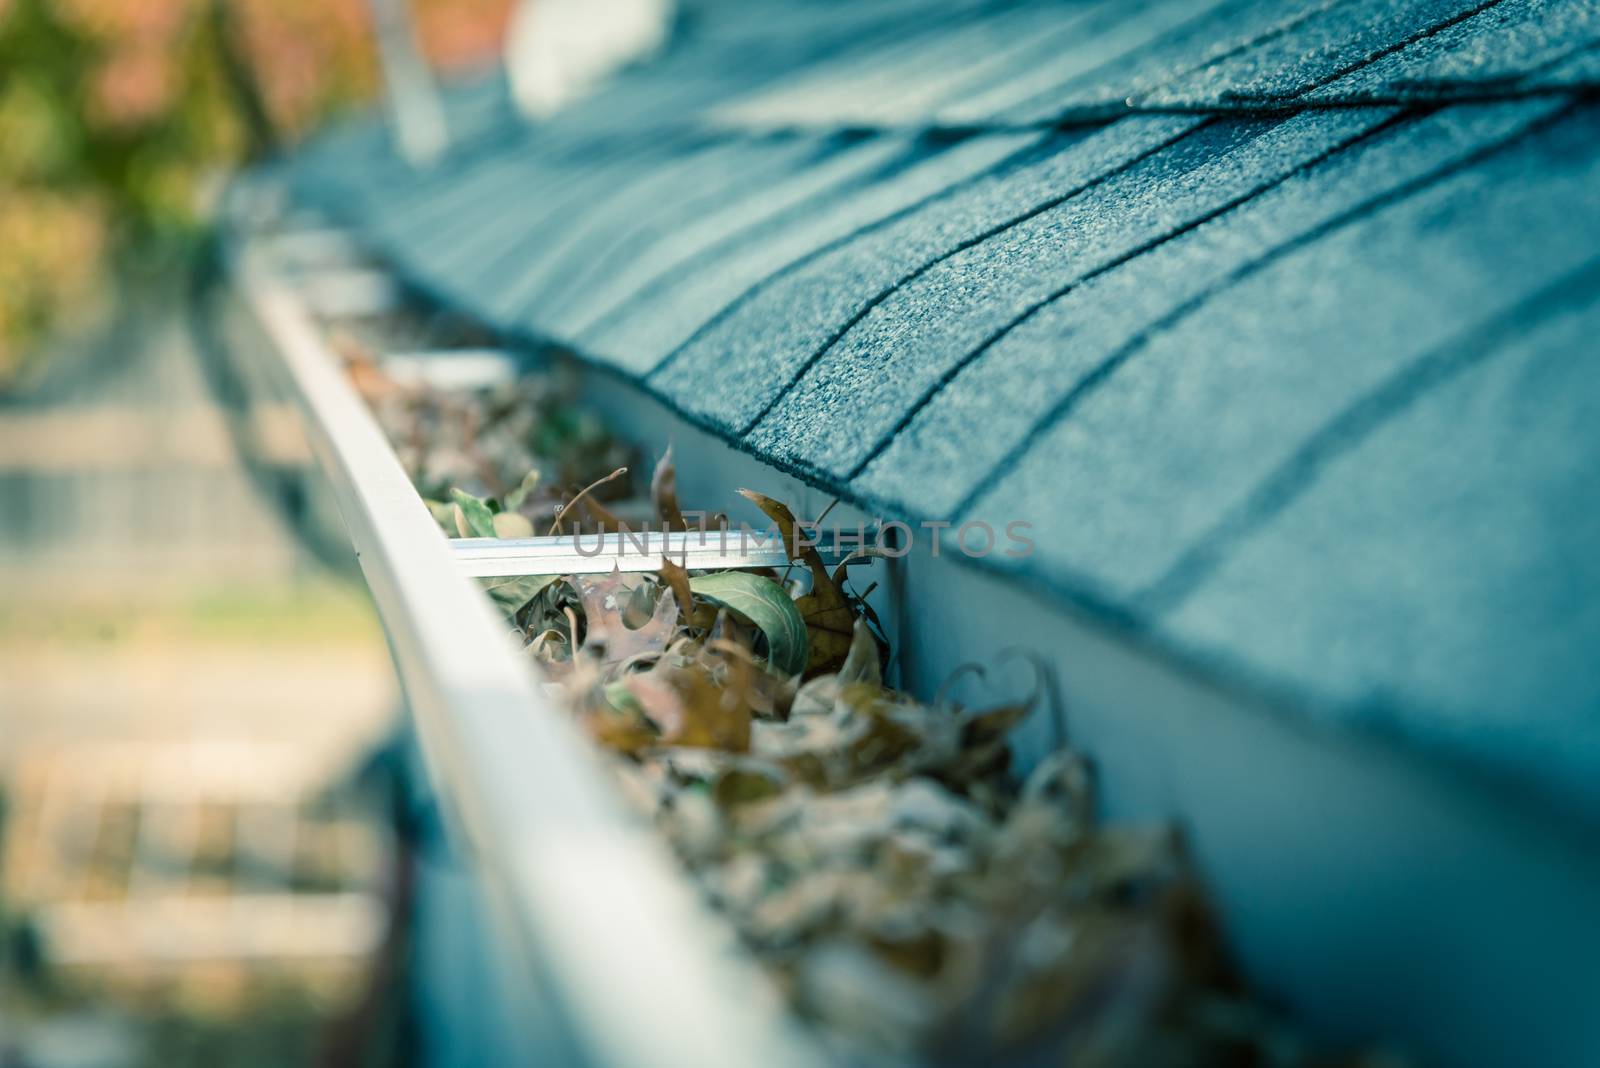 Clogged gutter near roof shingles with colorful fall foliage in background by trongnguyen